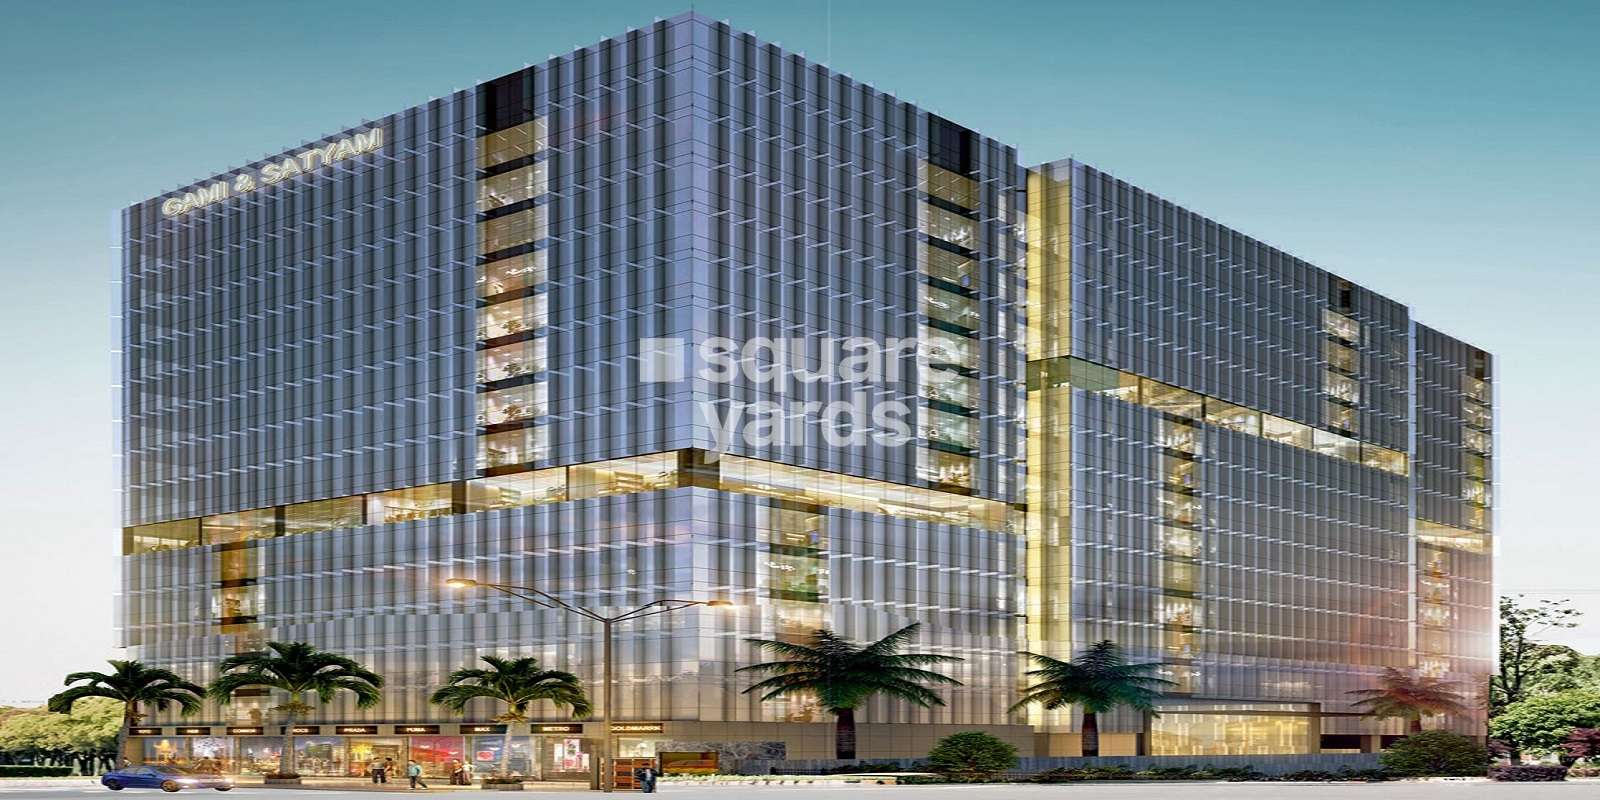 Gami Satyam Business Avenue Cover Image